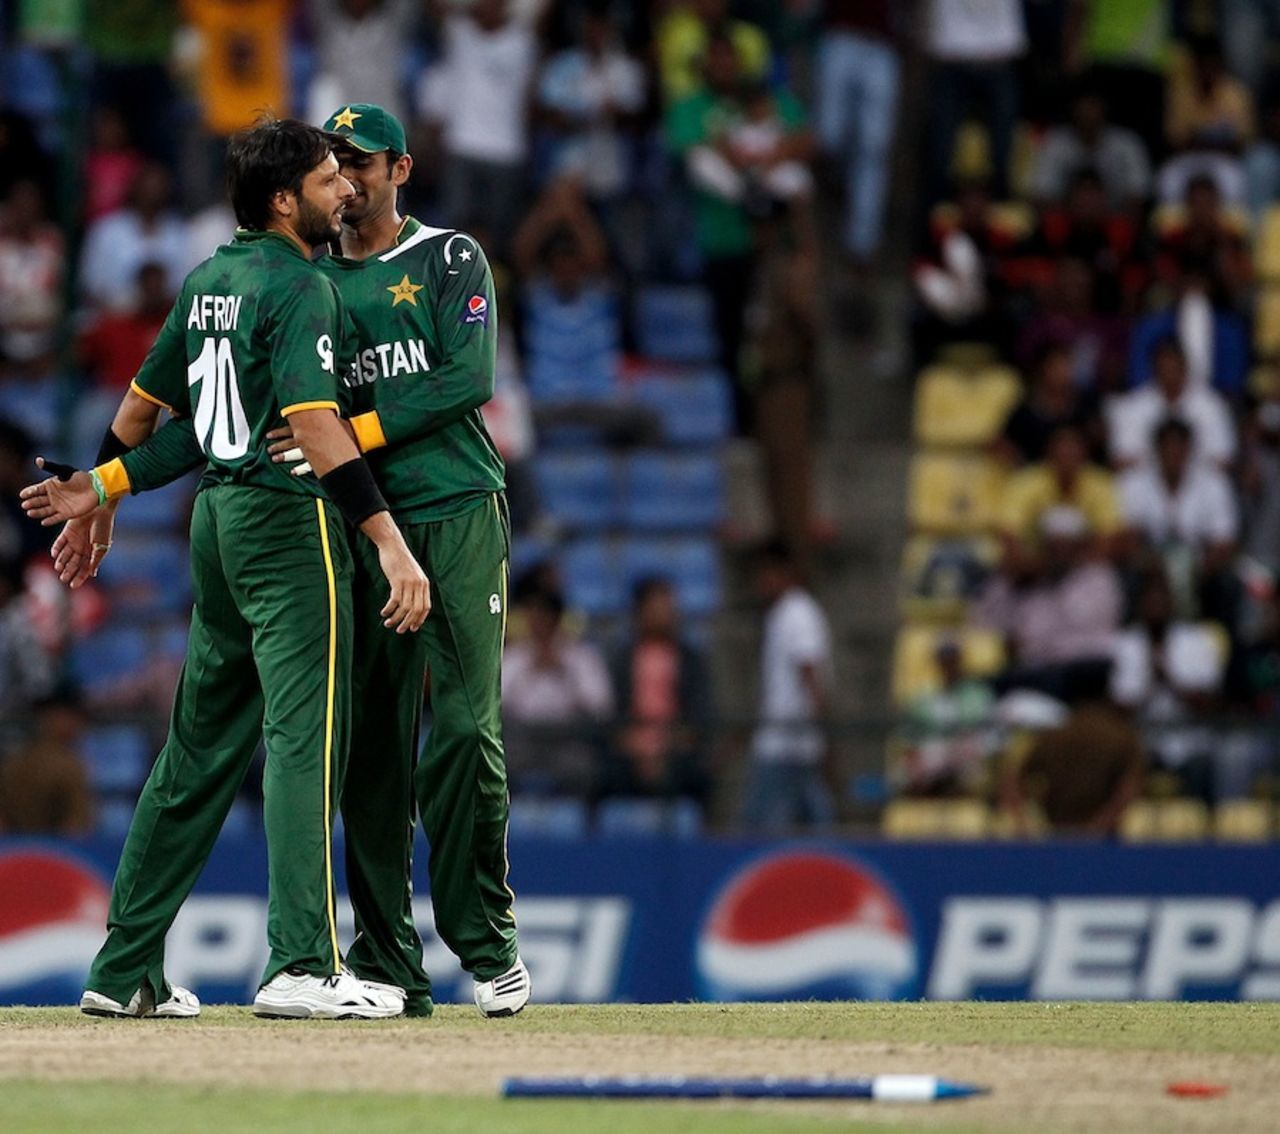 Shahid Afridi is congratulated by Shoaib Malik after picking up Rob Nicol's wicket, New Zealand v Pakistan, World T20 2012, Group D, Pallekele, September, 23, 2012